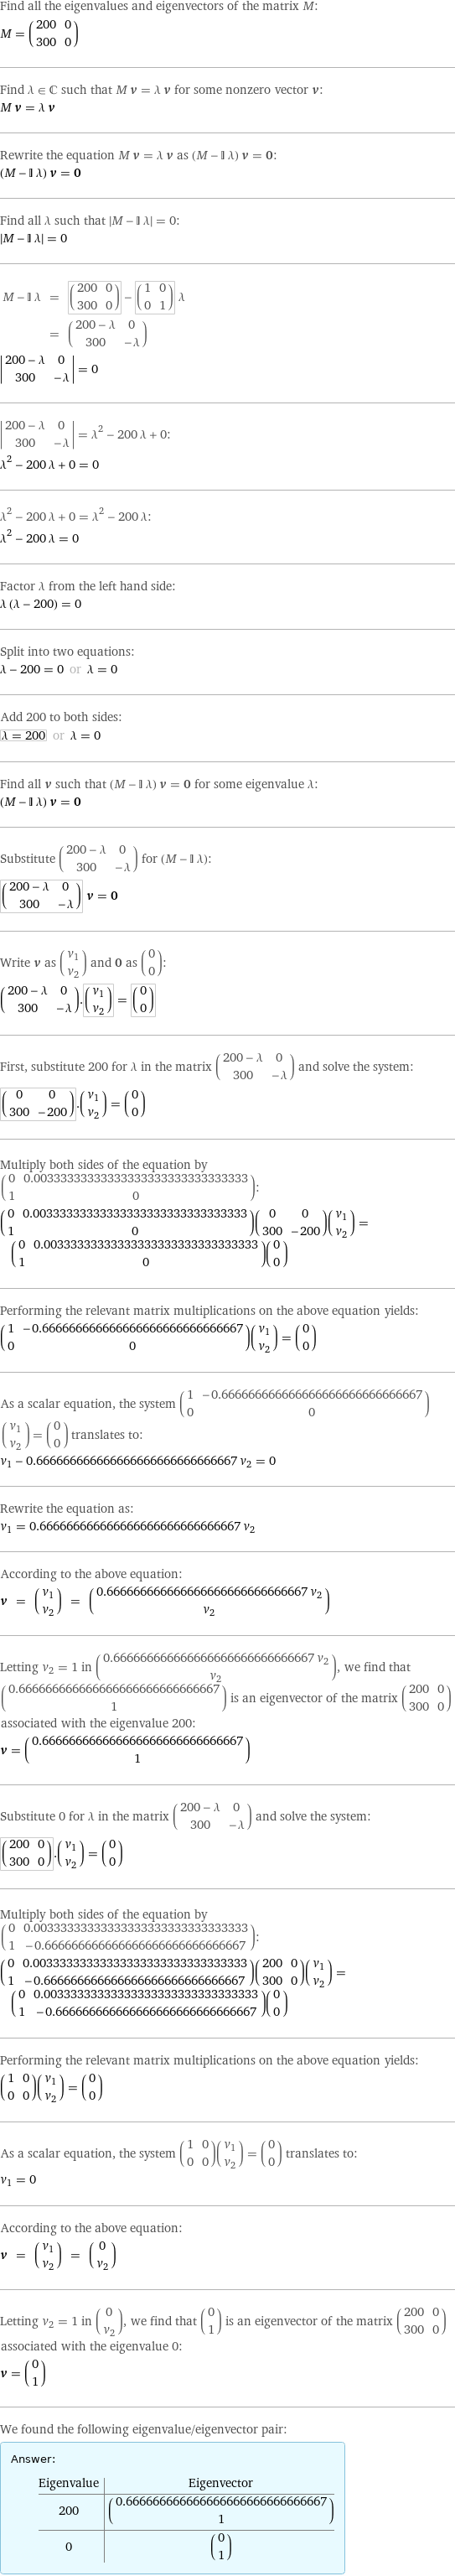 Find all the eigenvalues and eigenvectors of the matrix M: M = (200 | 0 300 | 0) Find λ element C such that M v = λ v for some nonzero vector v: M v = λ v Rewrite the equation M v = λ v as (M - I λ) v = 0: (M - I λ) v = 0 Find all λ such that left bracketing bar M - I λ right bracketing bar = 0:  left bracketing bar M - I λ right bracketing bar = 0 M - I λ | = | (200 | 0 300 | 0) - (1 | 0 0 | 1) λ  | = | (200 - λ | 0 300 | -λ) invisible comma   left bracketing bar 200 - λ | 0 300 | -λ right bracketing bar = 0  left bracketing bar 200 - λ | 0 300 | -λ right bracketing bar = λ^2 - 200 λ + 0: λ^2 - 200 λ + 0 = 0 λ^2 - 200 λ + 0 = λ^2 - 200 λ: λ^2 - 200 λ = 0 Factor λ from the left hand side: λ (λ - 200) = 0 Split into two equations: λ - 200 = 0 or λ = 0 Add 200 to both sides: λ = 200 or λ = 0 Find all v such that (M - I λ) v = 0 for some eigenvalue λ: (M - I λ) v = 0 Substitute (200 - λ | 0 300 | -λ) for (M - I λ): (200 - λ | 0 300 | -λ) v = 0 Write v as (v_1 v_2) and 0 as (0 0): (200 - λ | 0 300 | -λ).(v_1 v_2) = (0 0) First, substitute 200 for λ in the matrix (200 - λ | 0 300 | -λ) and solve the system: (0 | 0 300 | -200).(v_1 v_2) = (0 0) Multiply both sides of the equation by (0 | 0.00333333333333333333333333333333 1 | 0): (0 | 0.00333333333333333333333333333333 1 | 0)(0 | 0 300 | -200)(v_1 v_2) = (0 | 0.00333333333333333333333333333333 1 | 0)(0 0) Performing the relevant matrix multiplications on the above equation yields: (1 | -0.666666666666666666666666666667 0 | 0)(v_1 v_2) = (0 0) As a scalar equation, the system (1 | -0.666666666666666666666666666667 0 | 0)(v_1 v_2) = (0 0) translates to: v_1 - 0.666666666666666666666666666667 v_2 = 0 Rewrite the equation as: v_1 = 0.666666666666666666666666666667 v_2 According to the above equation: v = (v_1 v_2) = (0.666666666666666666666666666667 v_2 v_2) Letting v_2 = 1 in (0.666666666666666666666666666667 v_2 v_2), we find that (0.666666666666666666666666666667 1) is an eigenvector of the matrix (200 | 0 300 | 0) associated with the eigenvalue 200: v = (0.666666666666666666666666666667 1) Substitute 0 for λ in the matrix (200 - λ | 0 300 | -λ) and solve the system: (200 | 0 300 | 0).(v_1 v_2) = (0 0) Multiply both sides of the equation by (0 | 0.00333333333333333333333333333333 1 | -0.666666666666666666666666666667): (0 | 0.00333333333333333333333333333333 1 | -0.666666666666666666666666666667)(200 | 0 300 | 0)(v_1 v_2) = (0 | 0.00333333333333333333333333333333 1 | -0.666666666666666666666666666667)(0 0) Performing the relevant matrix multiplications on the above equation yields: (1 | 0 0 | 0)(v_1 v_2) = (0 0) As a scalar equation, the system (1 | 0 0 | 0)(v_1 v_2) = (0 0) translates to: v_1 = 0 According to the above equation: v = (v_1 v_2) = (0 v_2) Letting v_2 = 1 in (0 v_2), we find that (0 1) is an eigenvector of the matrix (200 | 0 300 | 0) associated with the eigenvalue 0: v = (0 1) We found the following eigenvalue/eigenvector pair: Answer: |   | Eigenvalue | Eigenvector 200 | (0.666666666666666666666666666667 1) 0 | (0 1)